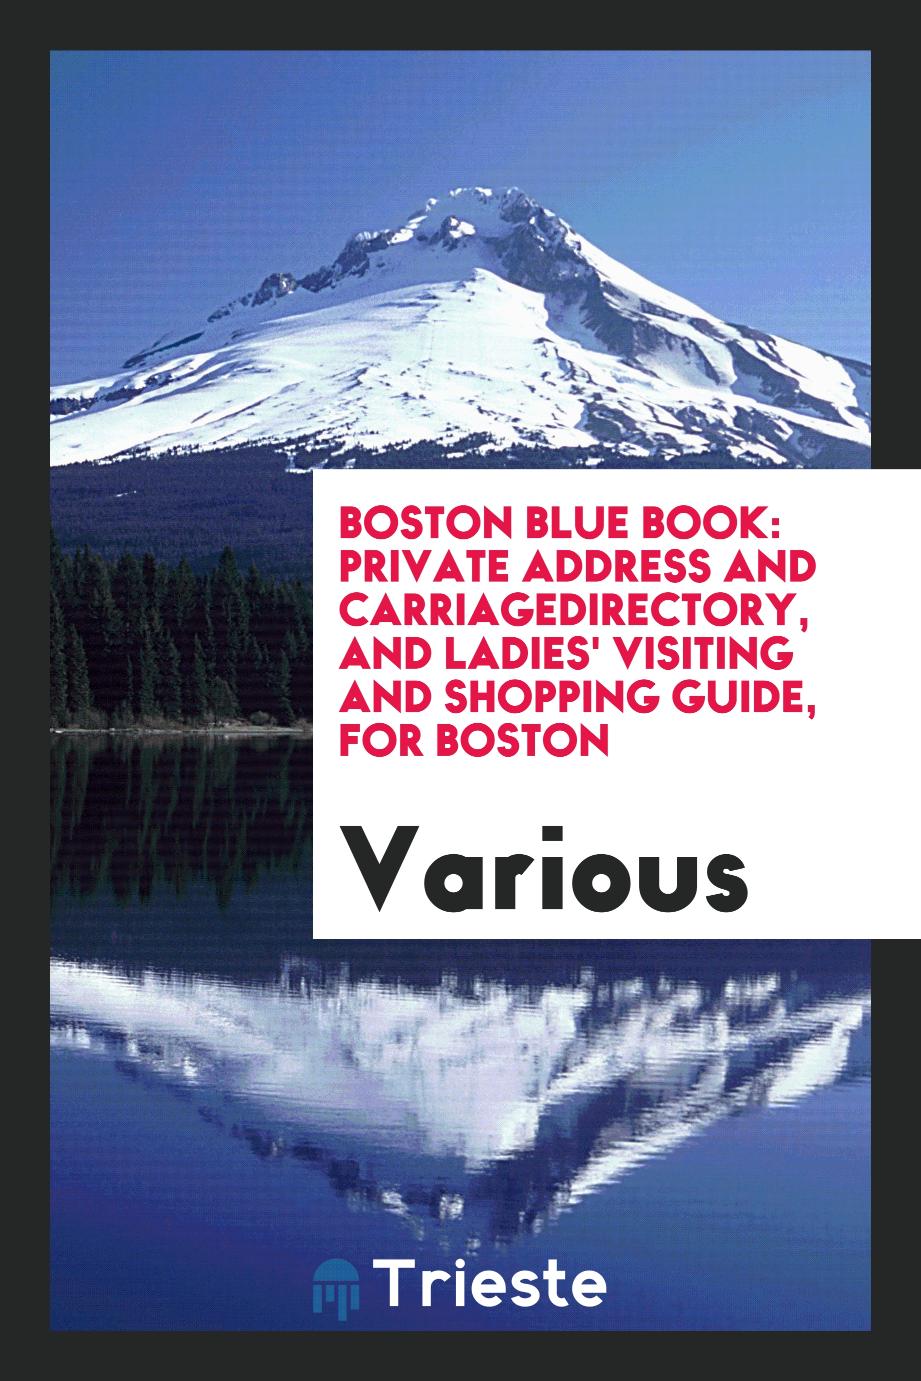 Boston Blue Book: private address and carriagedirectory, and Ladies' visiting and shopping guide, for Boston